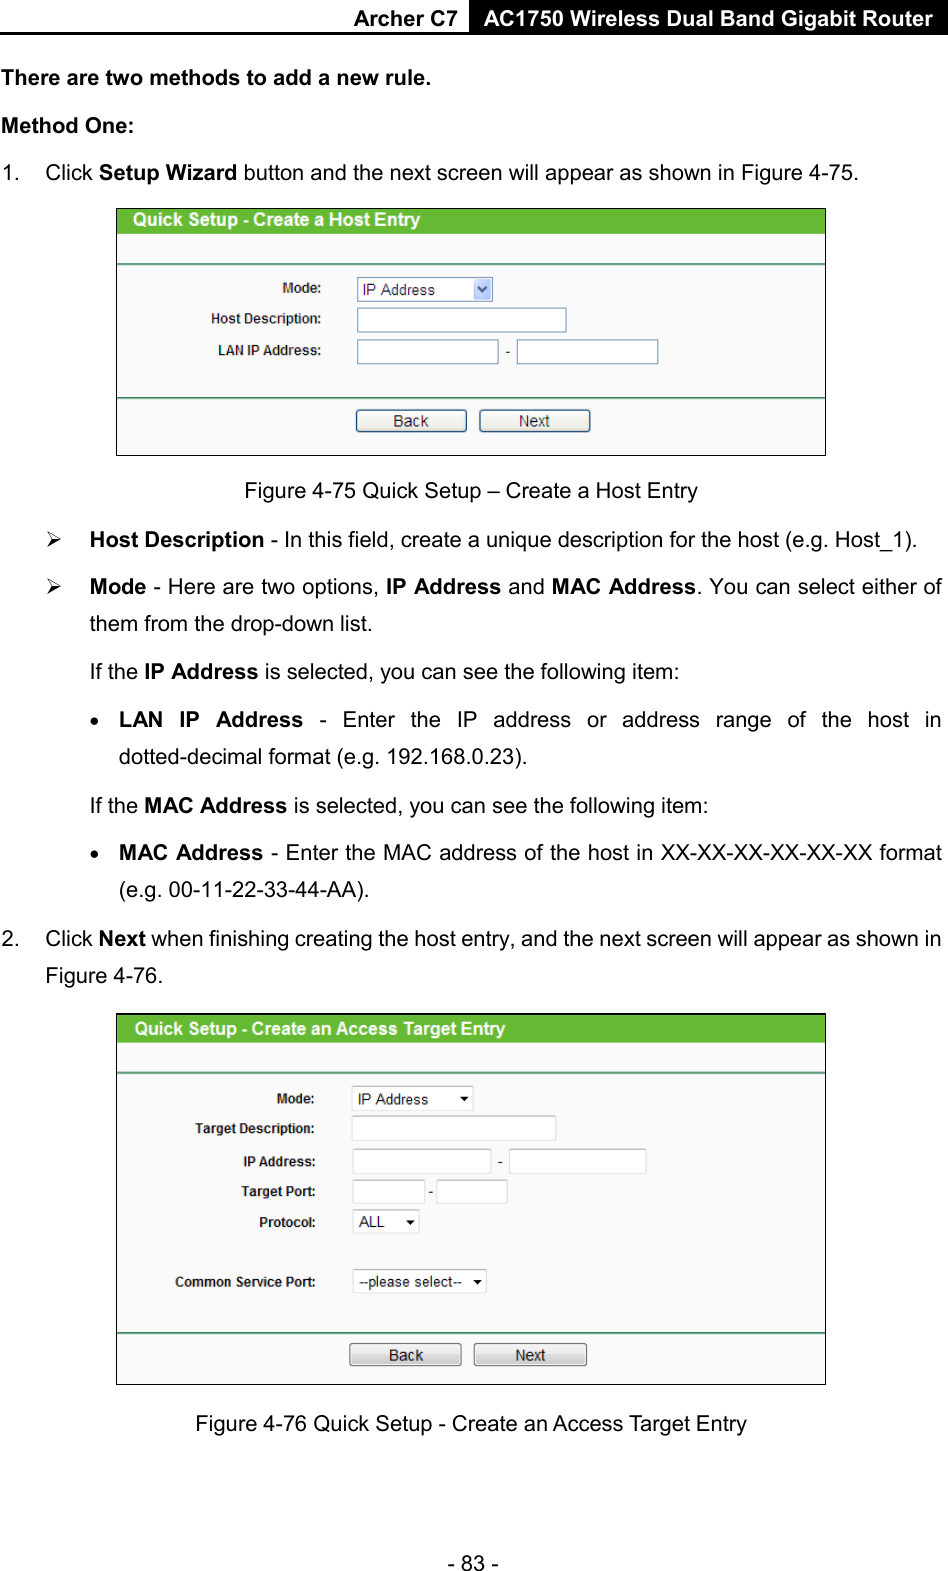 Archer C7 AC1750 Wireless Dual Band Gigabit Router  - 83 - There are two methods to add a new rule. Method One: 1. Click Setup Wizard button and the next screen will appear as shown in Figure 4-75.  Figure 4-75 Quick Setup – Create a Host Entry  Host Description - In this field, create a unique description for the host (e.g. Host_1).    Mode - Here are two options, IP Address and MAC Address. You can select either of them from the drop-down list.   If the IP Address is selected, you can see the following item: • LAN IP Address -  Enter the IP address or address range of the host in dotted-decimal format (e.g. 192.168.0.23).   If the MAC Address is selected, you can see the following item: • MAC Address - Enter the MAC address of the host in XX-XX-XX-XX-XX-XX format (e.g. 00-11-22-33-44-AA).   2.  Click Next when finishing creating the host entry, and the next screen will appear as shown in Figure 4-76.  Figure 4-76 Quick Setup - Create an Access Target Entry 